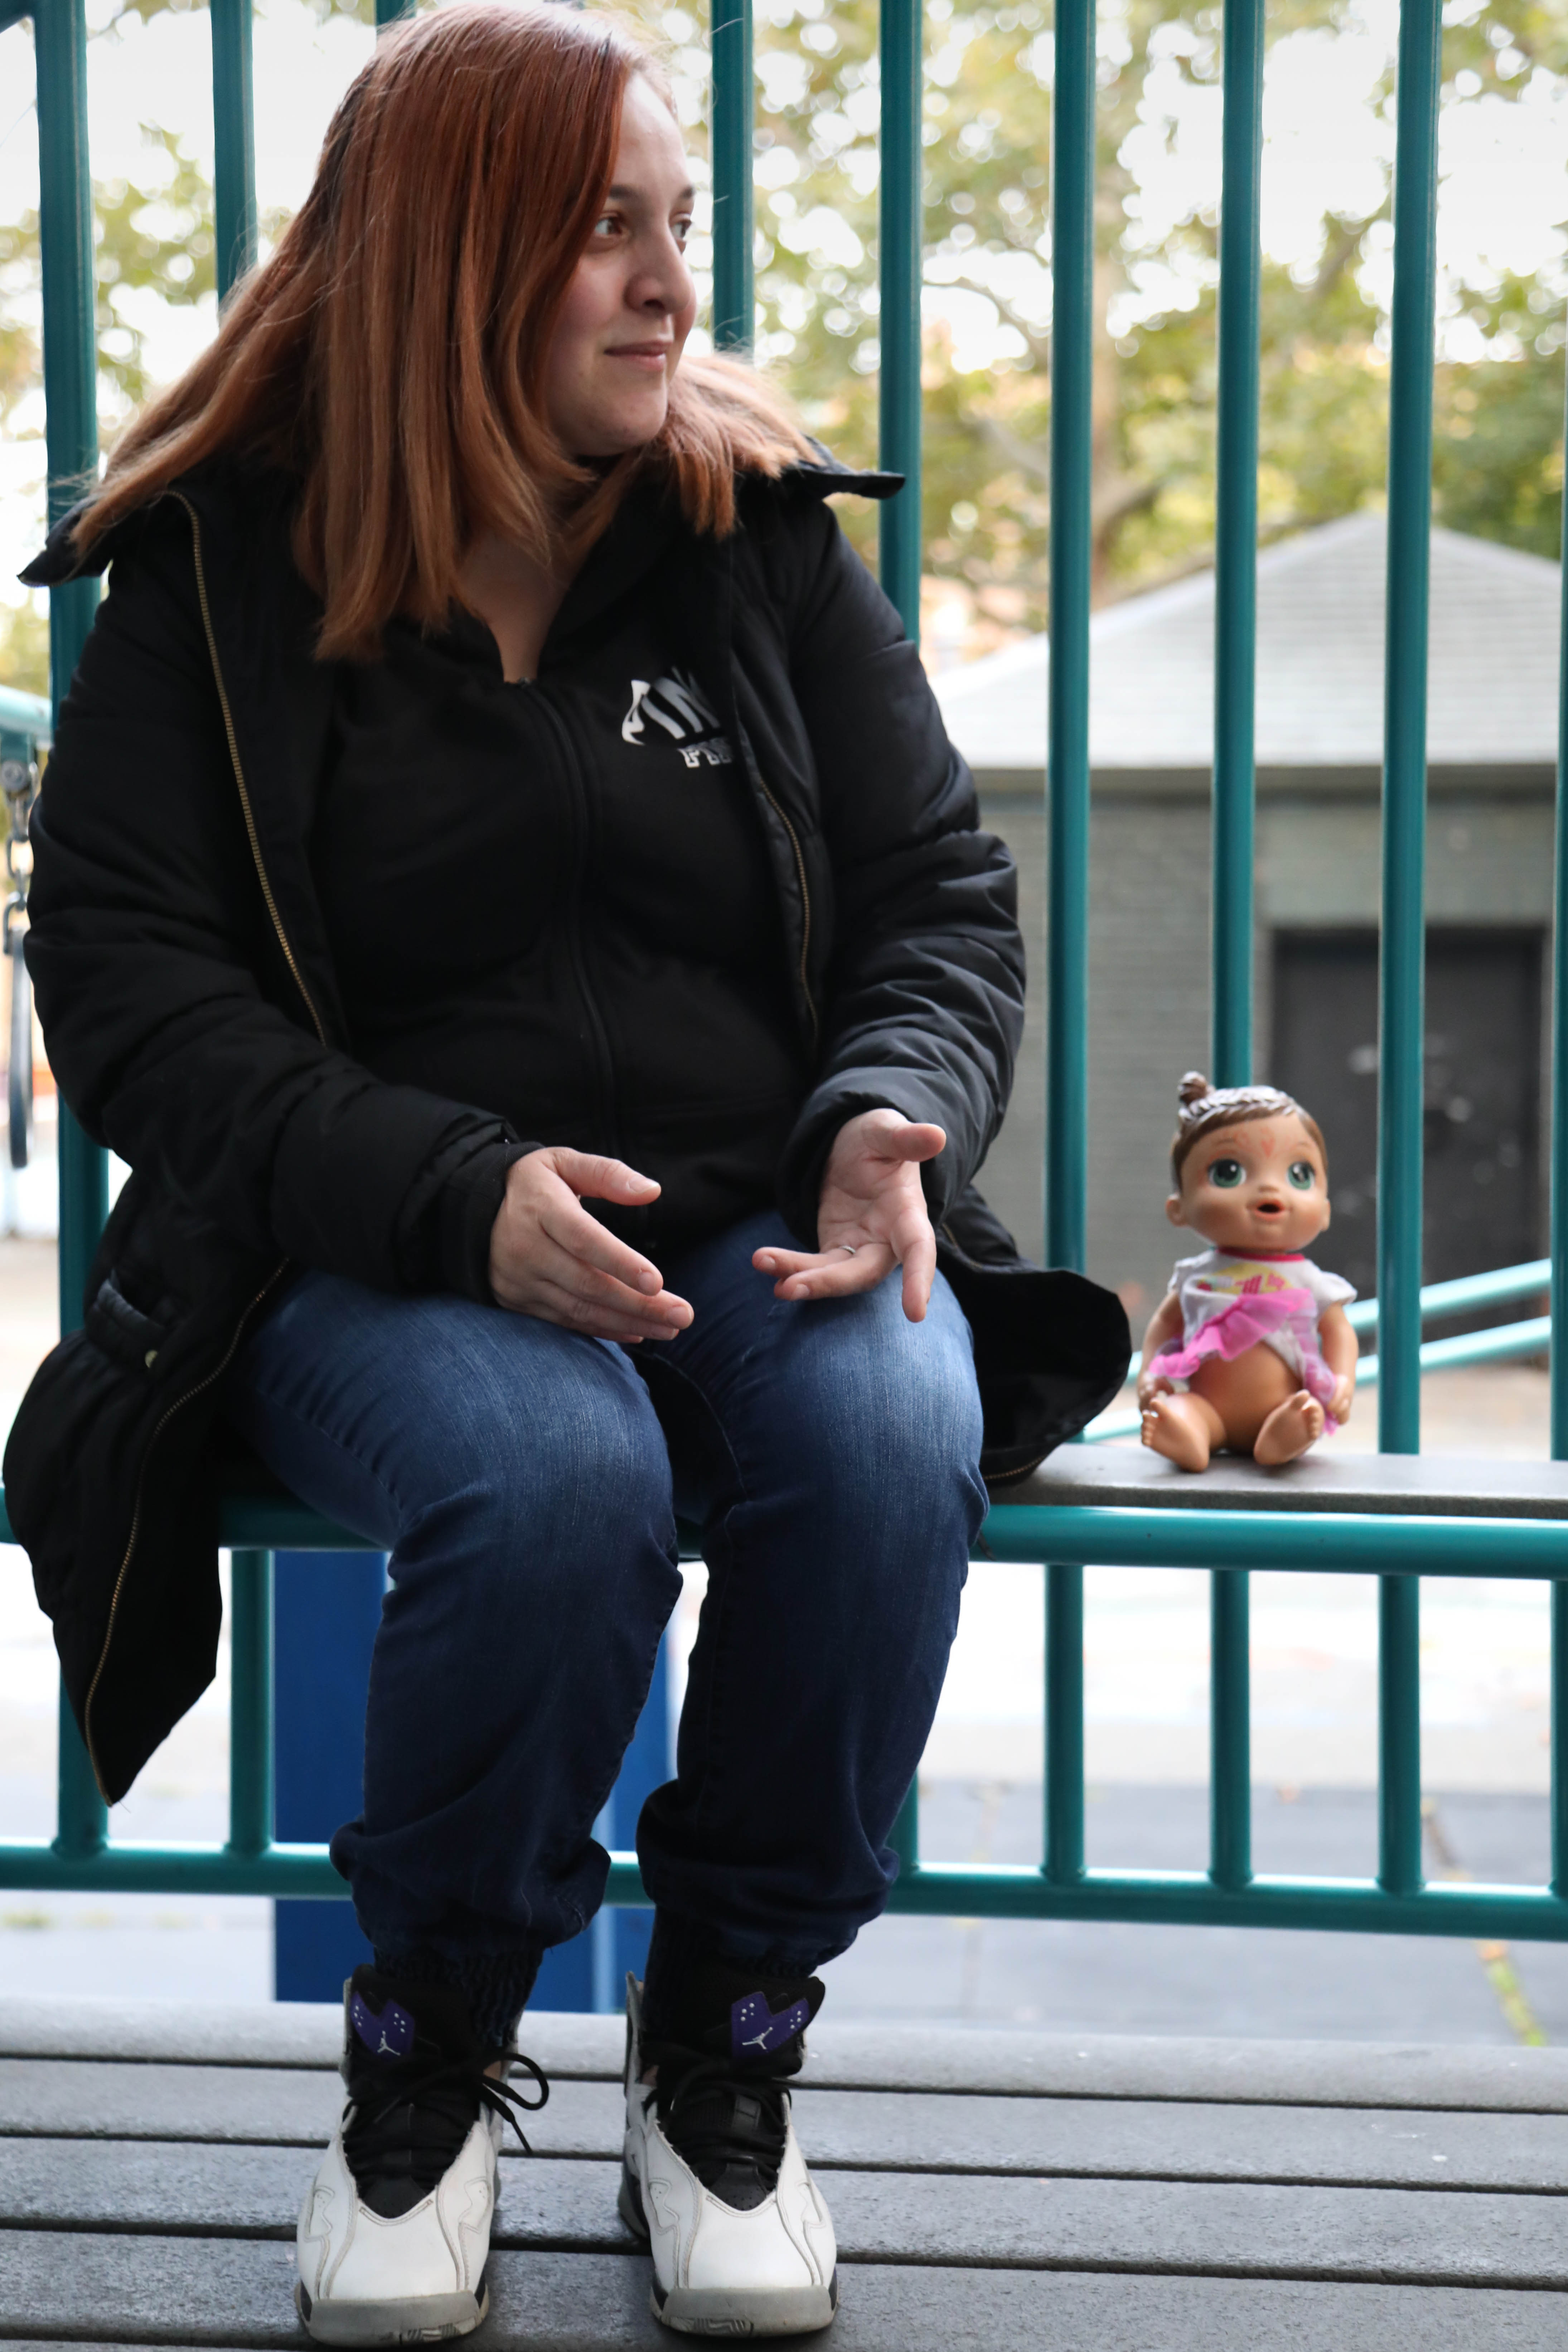 Brooke at the park with her daughter's doll 